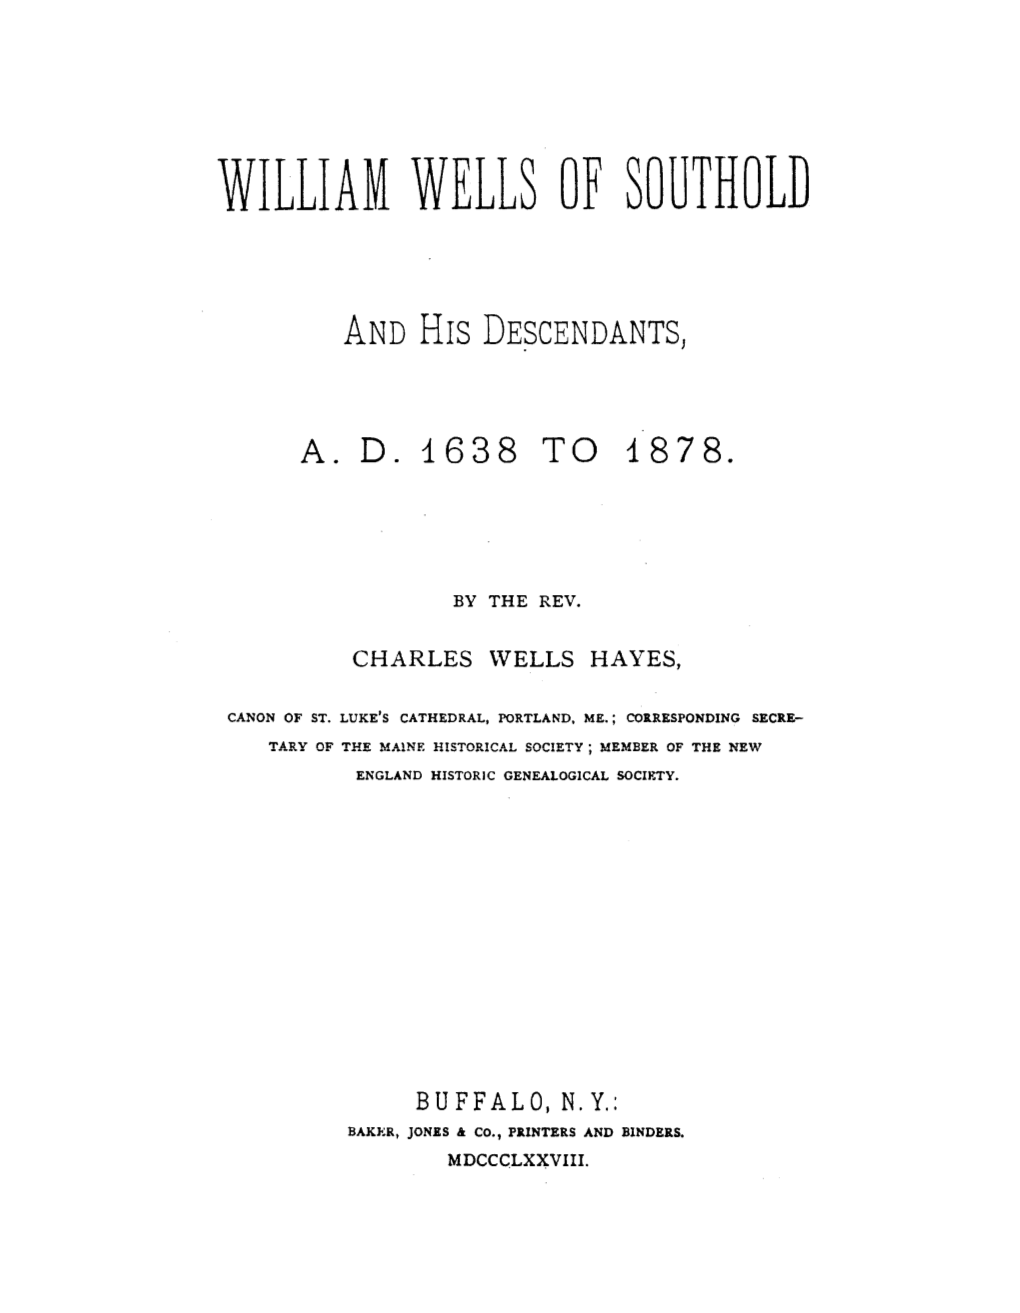 William Wells of Southold